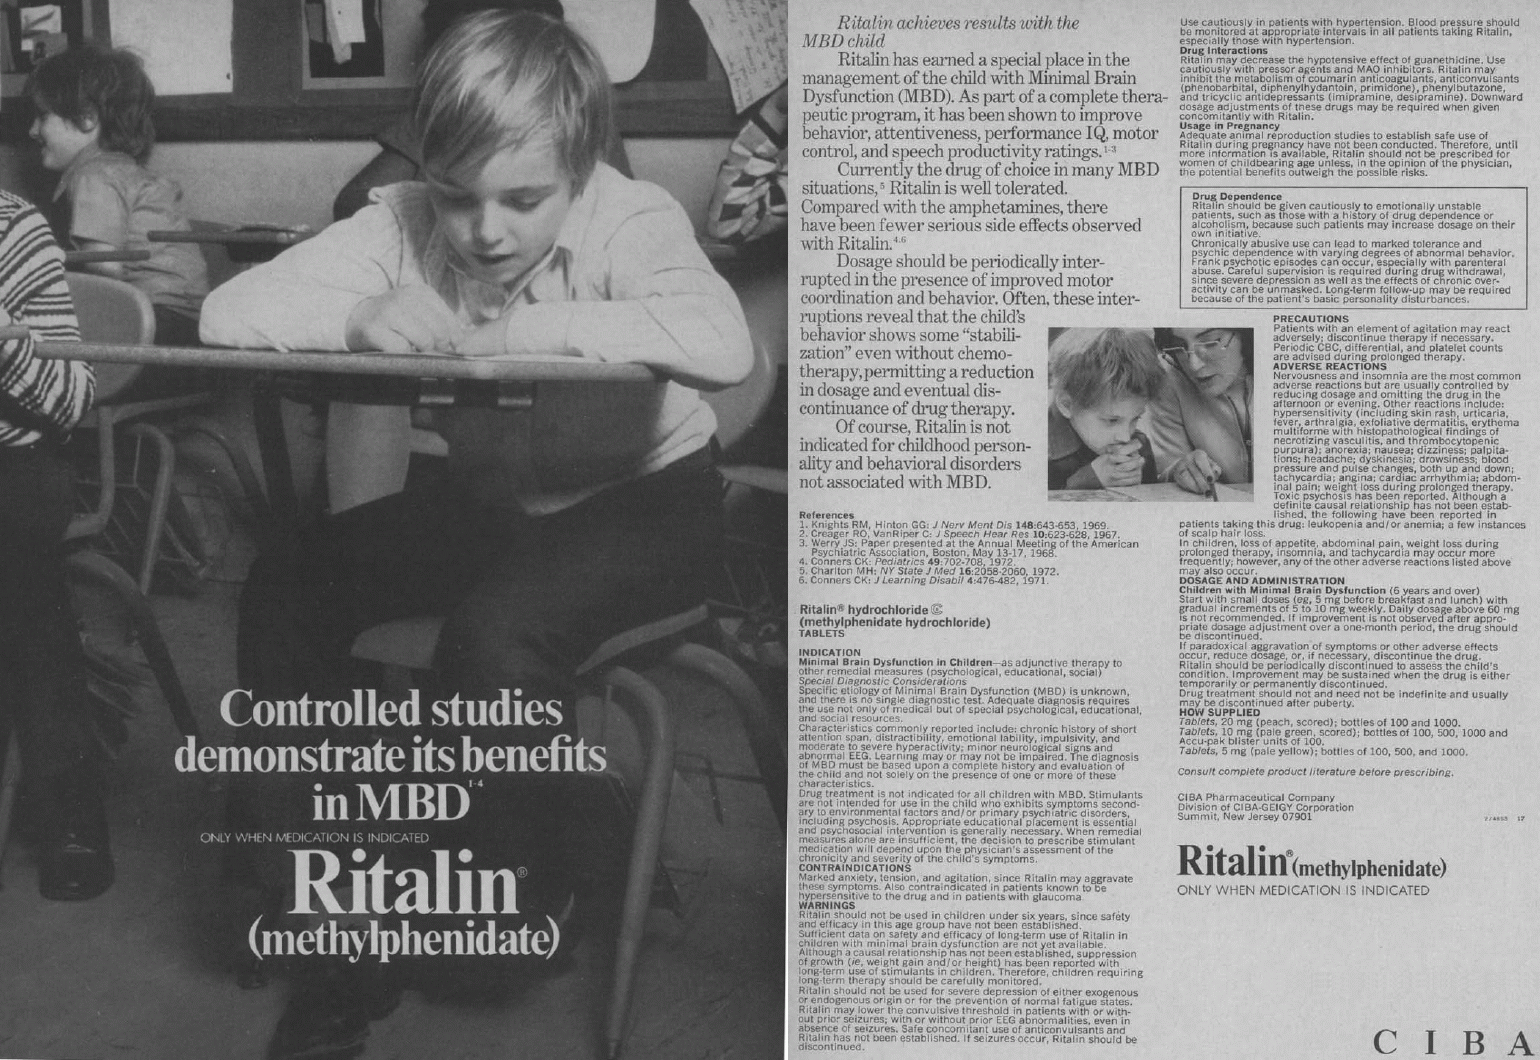 Ritalin has earned a special place in the management of the child with MBD